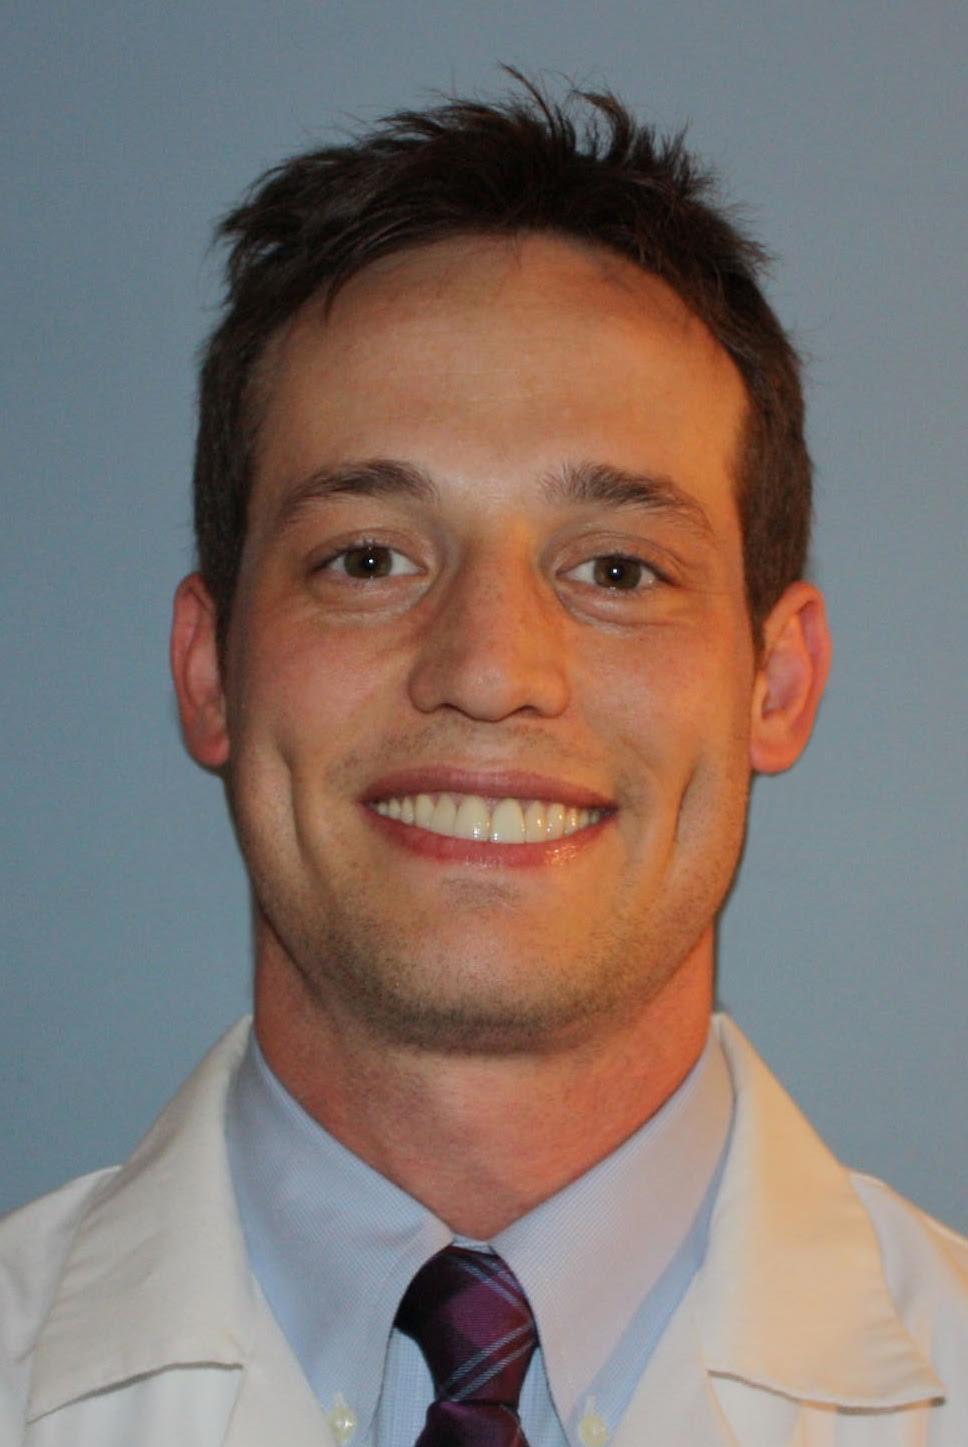 Dr. Ryan Gibbons attended the Lewis Katz School of Medicine at Temple University.